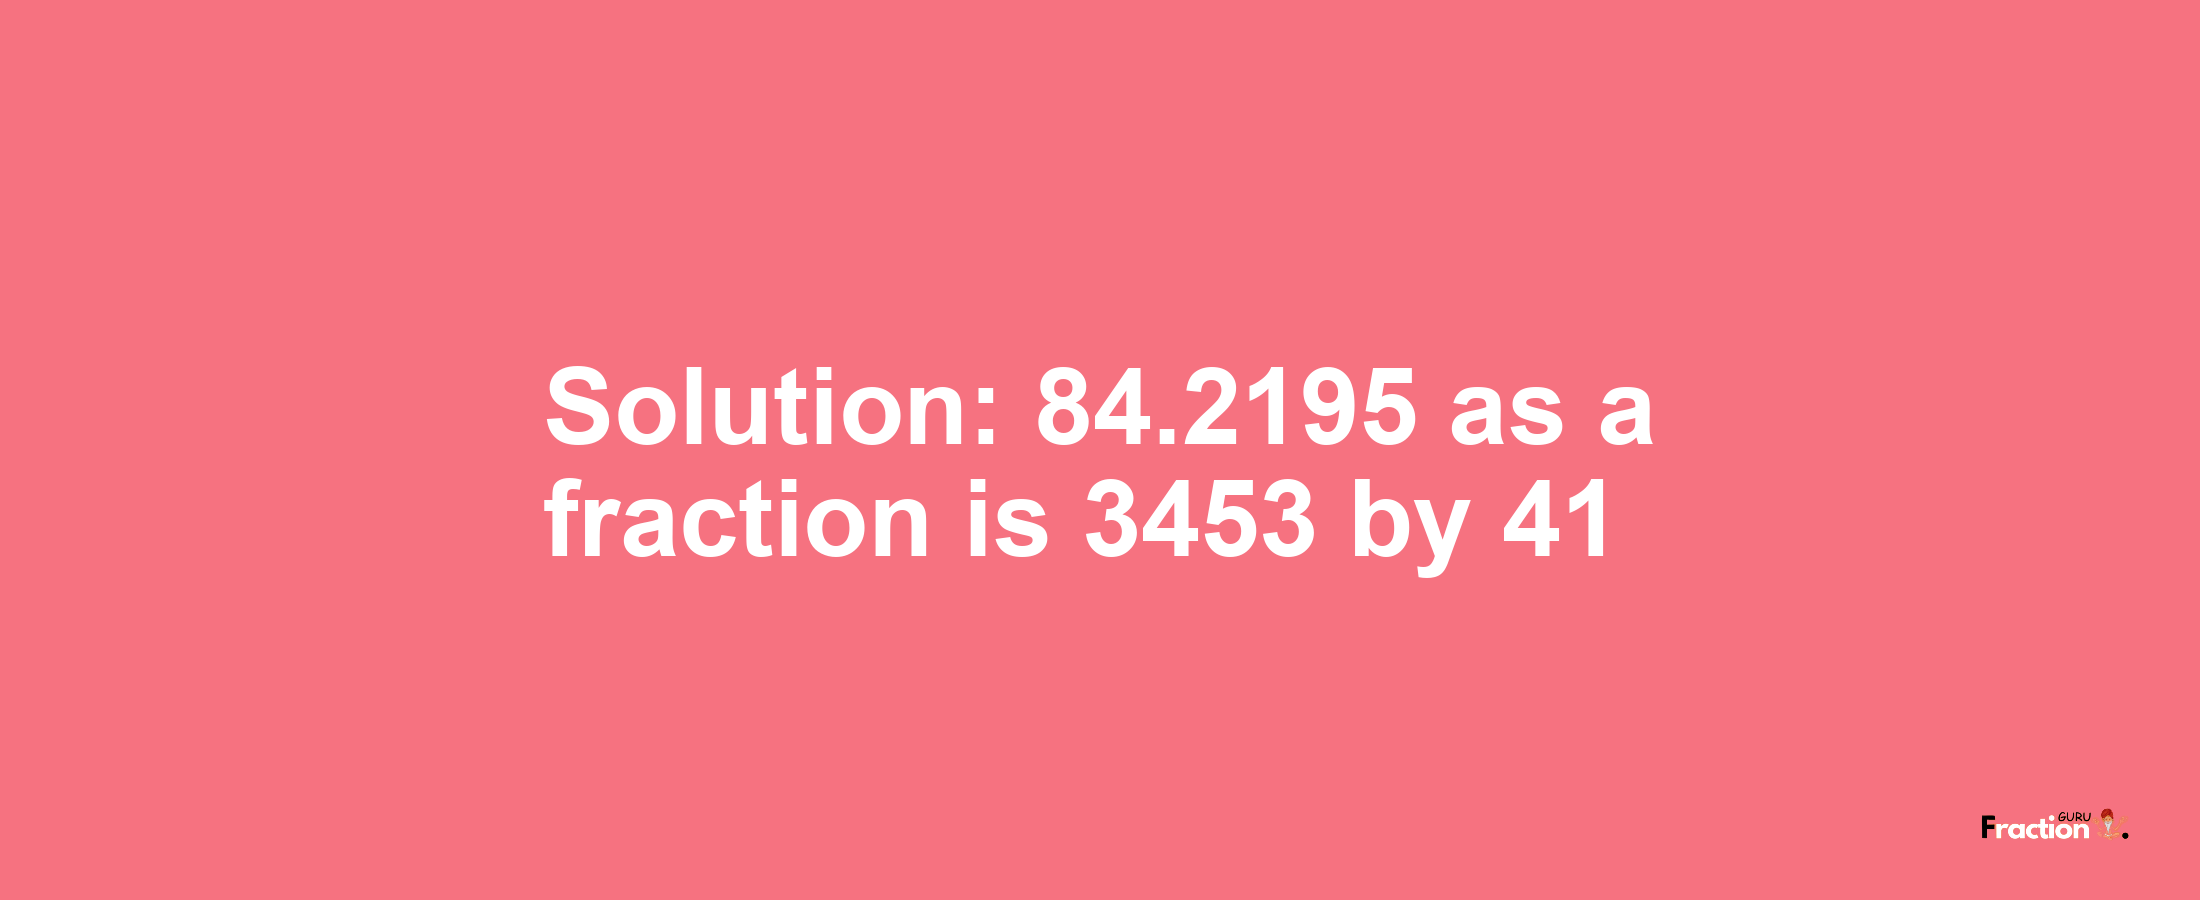 Solution:84.2195 as a fraction is 3453/41